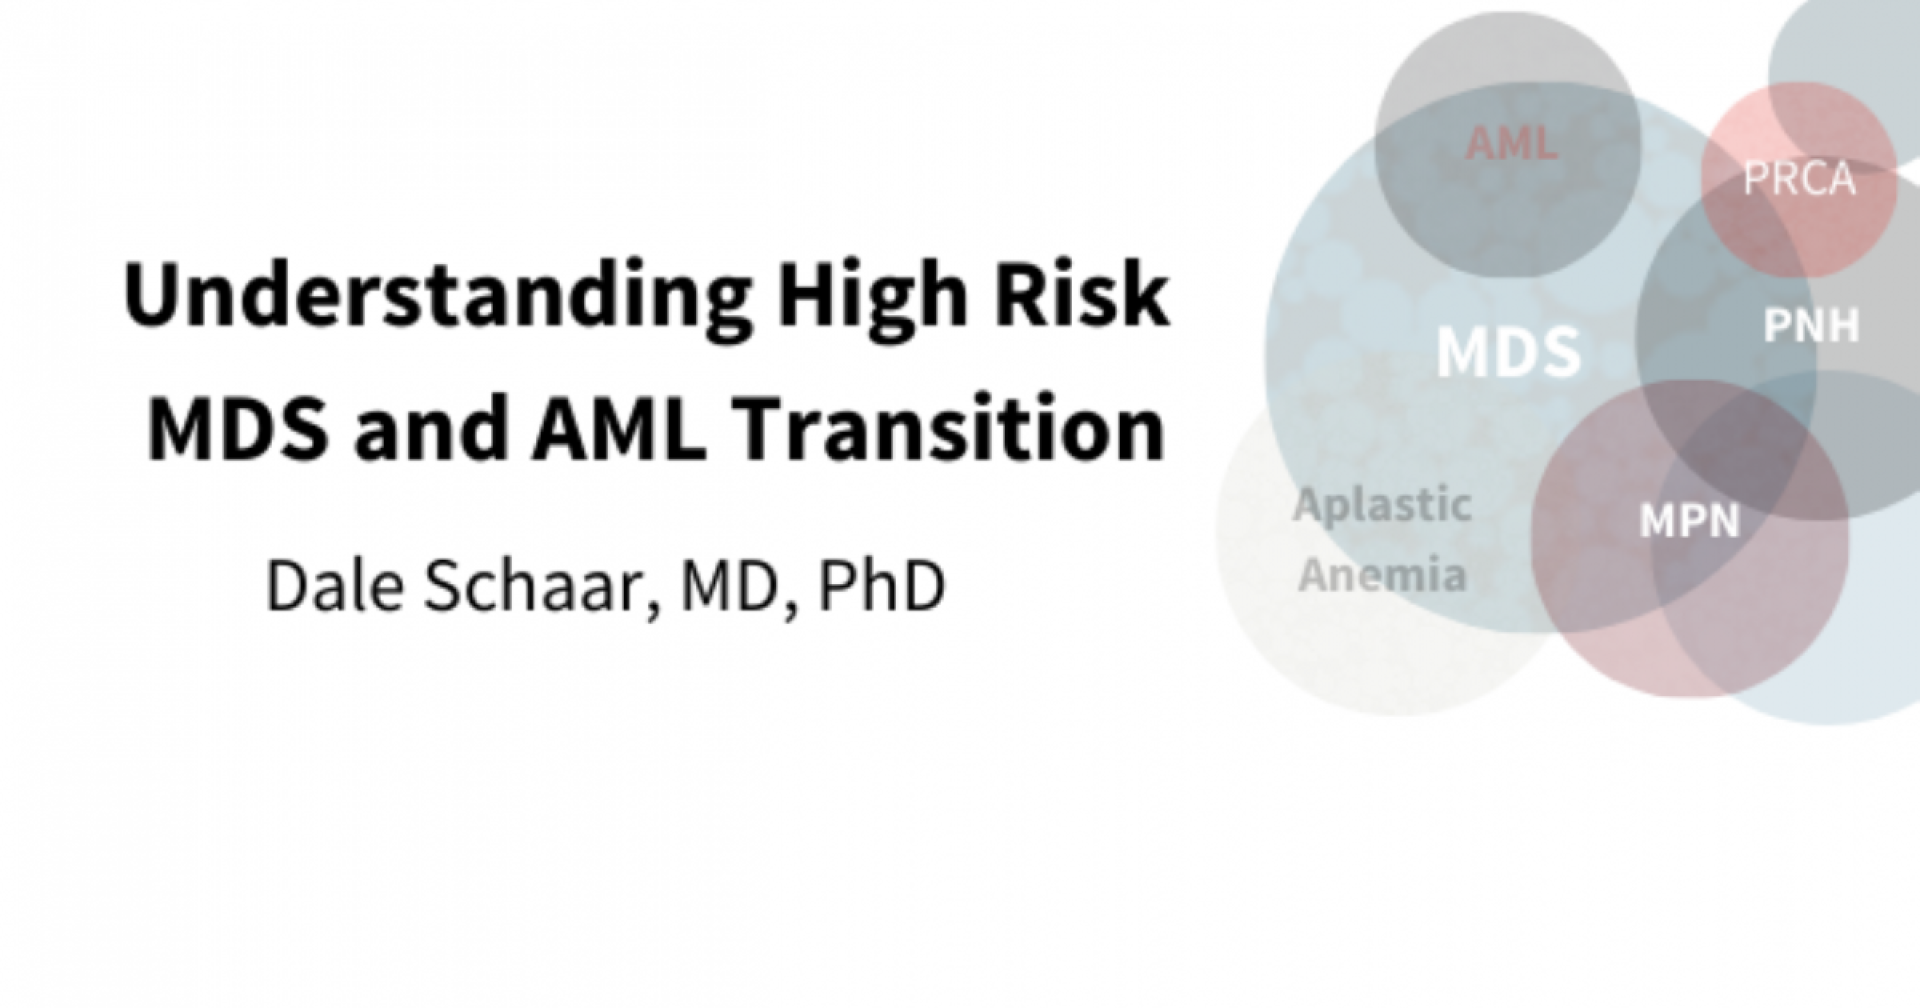 Understanding High Risk M-D-S and A-M-L transition